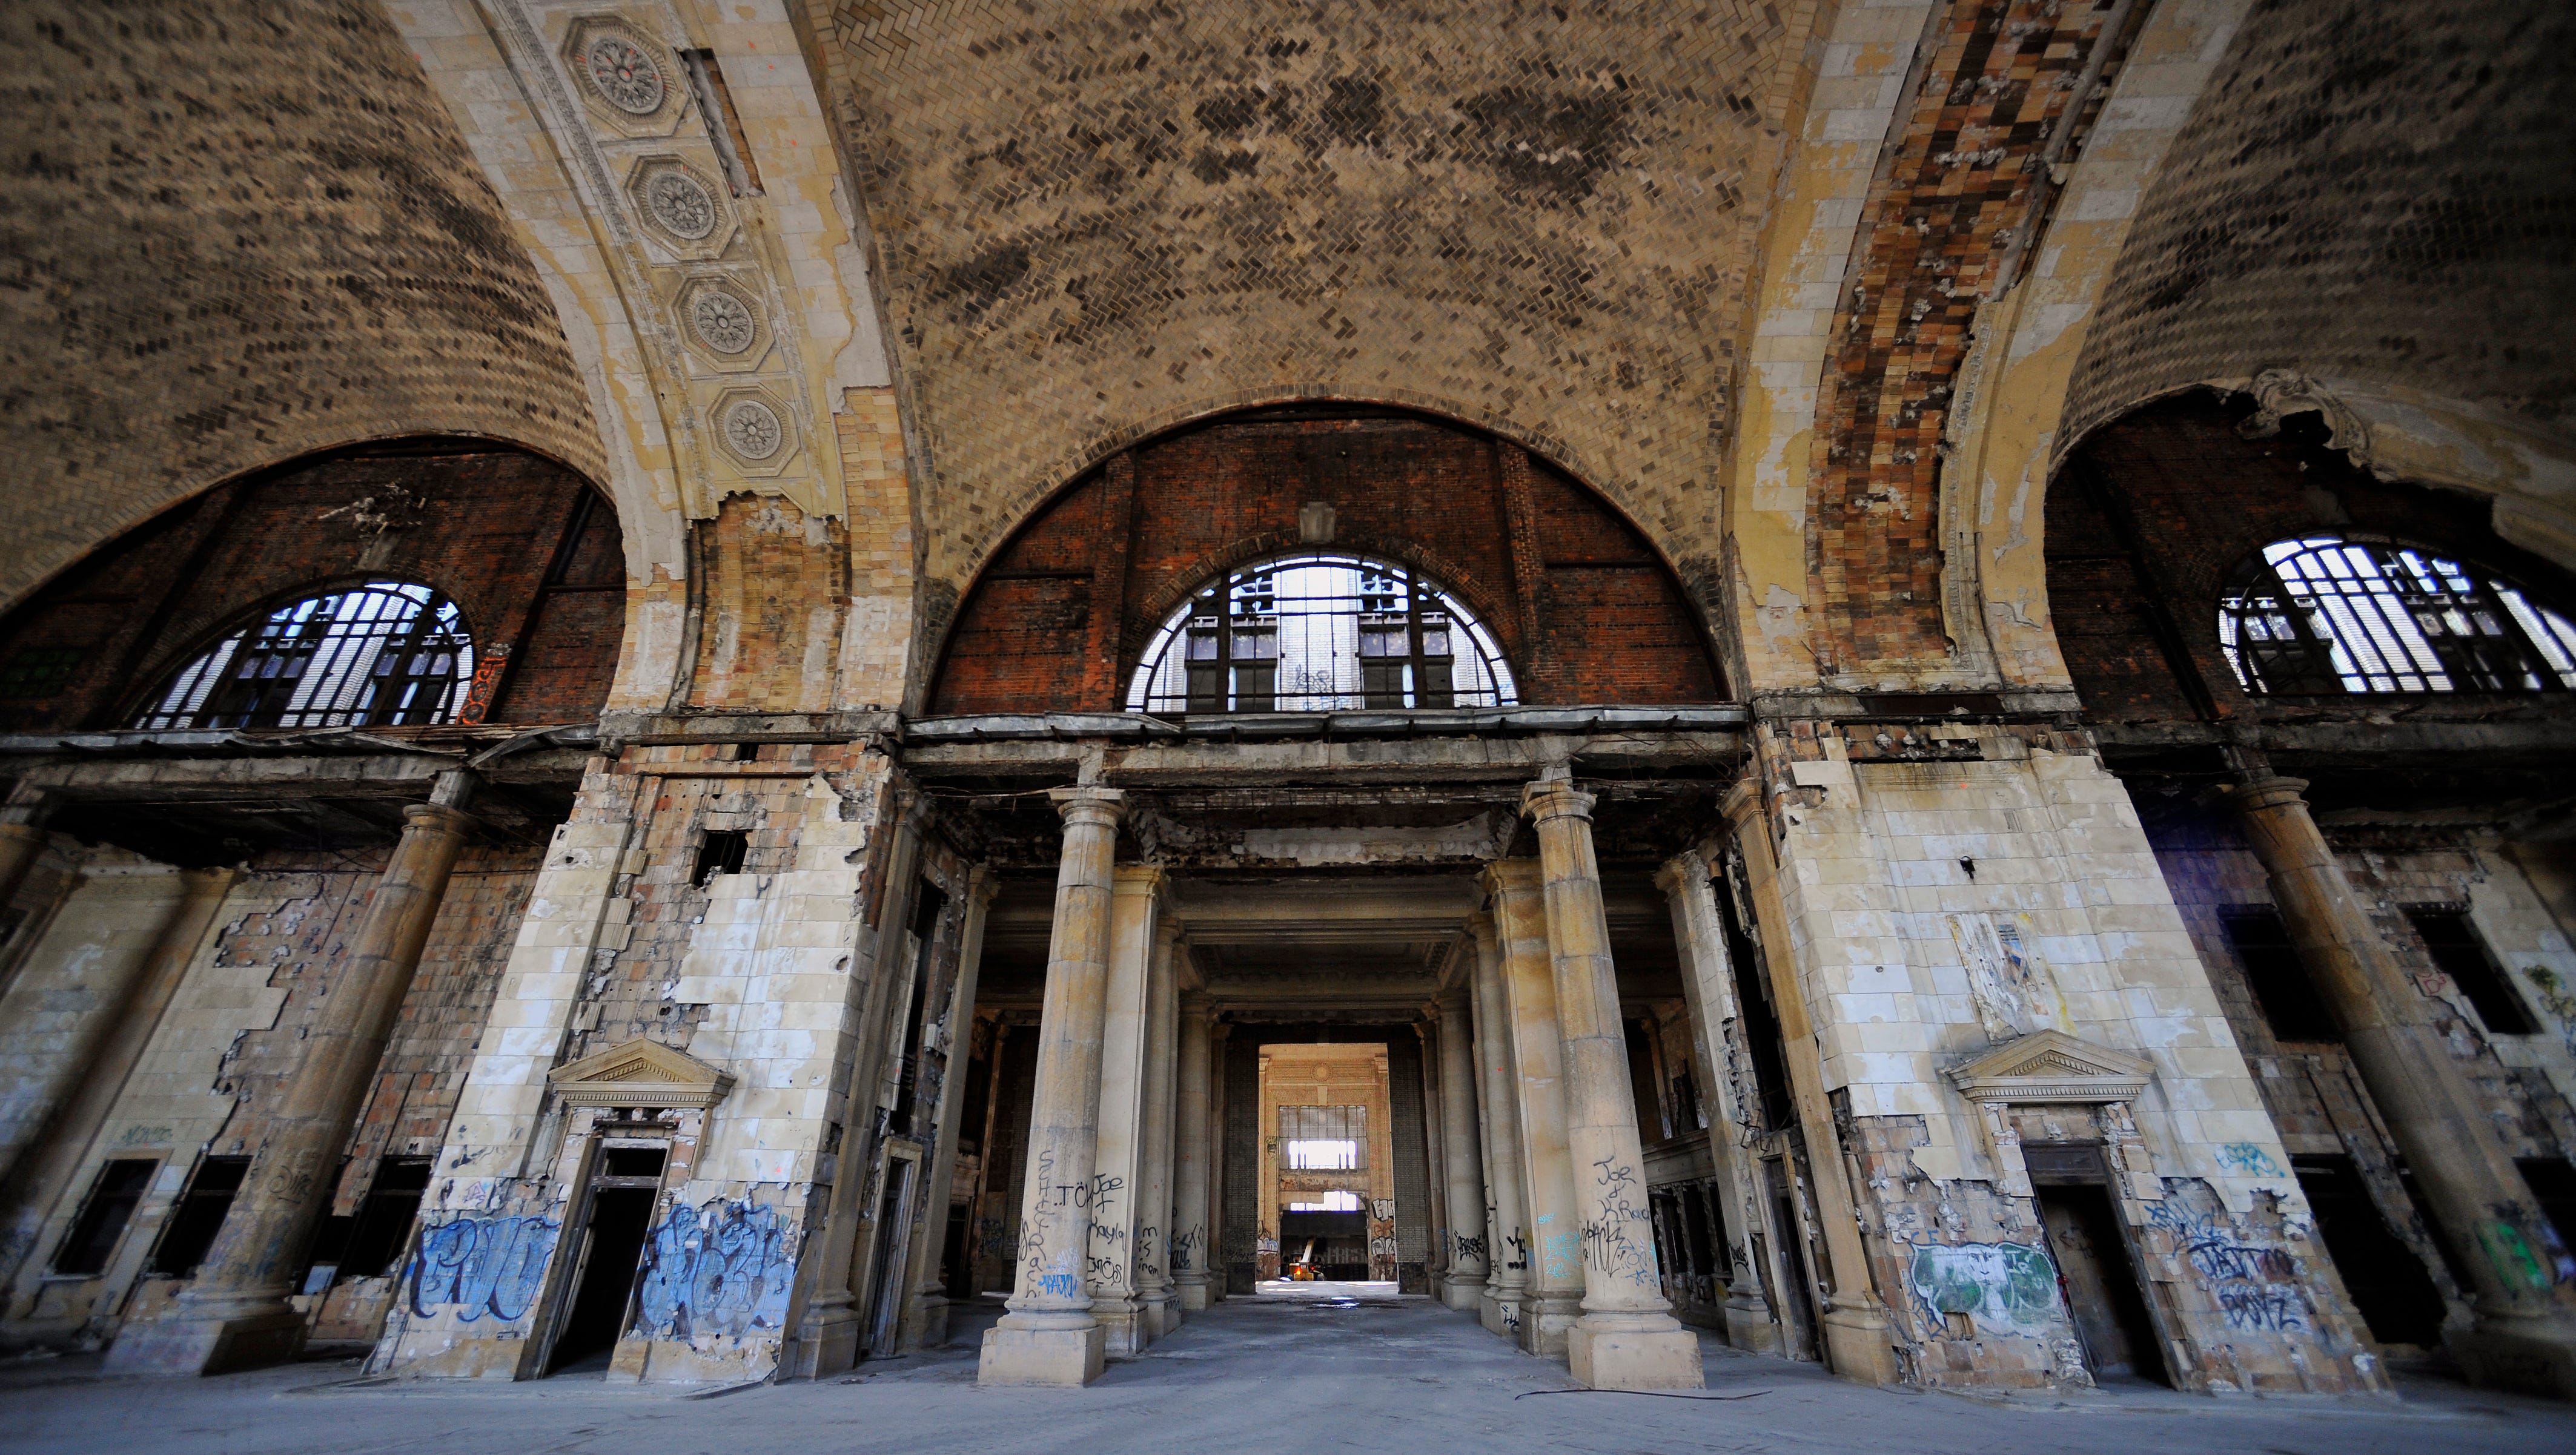 This is a view from just inside the main entrance to the abandoned, but recently cleaned up Michigan Central Train Depot in Detroit. (2011)